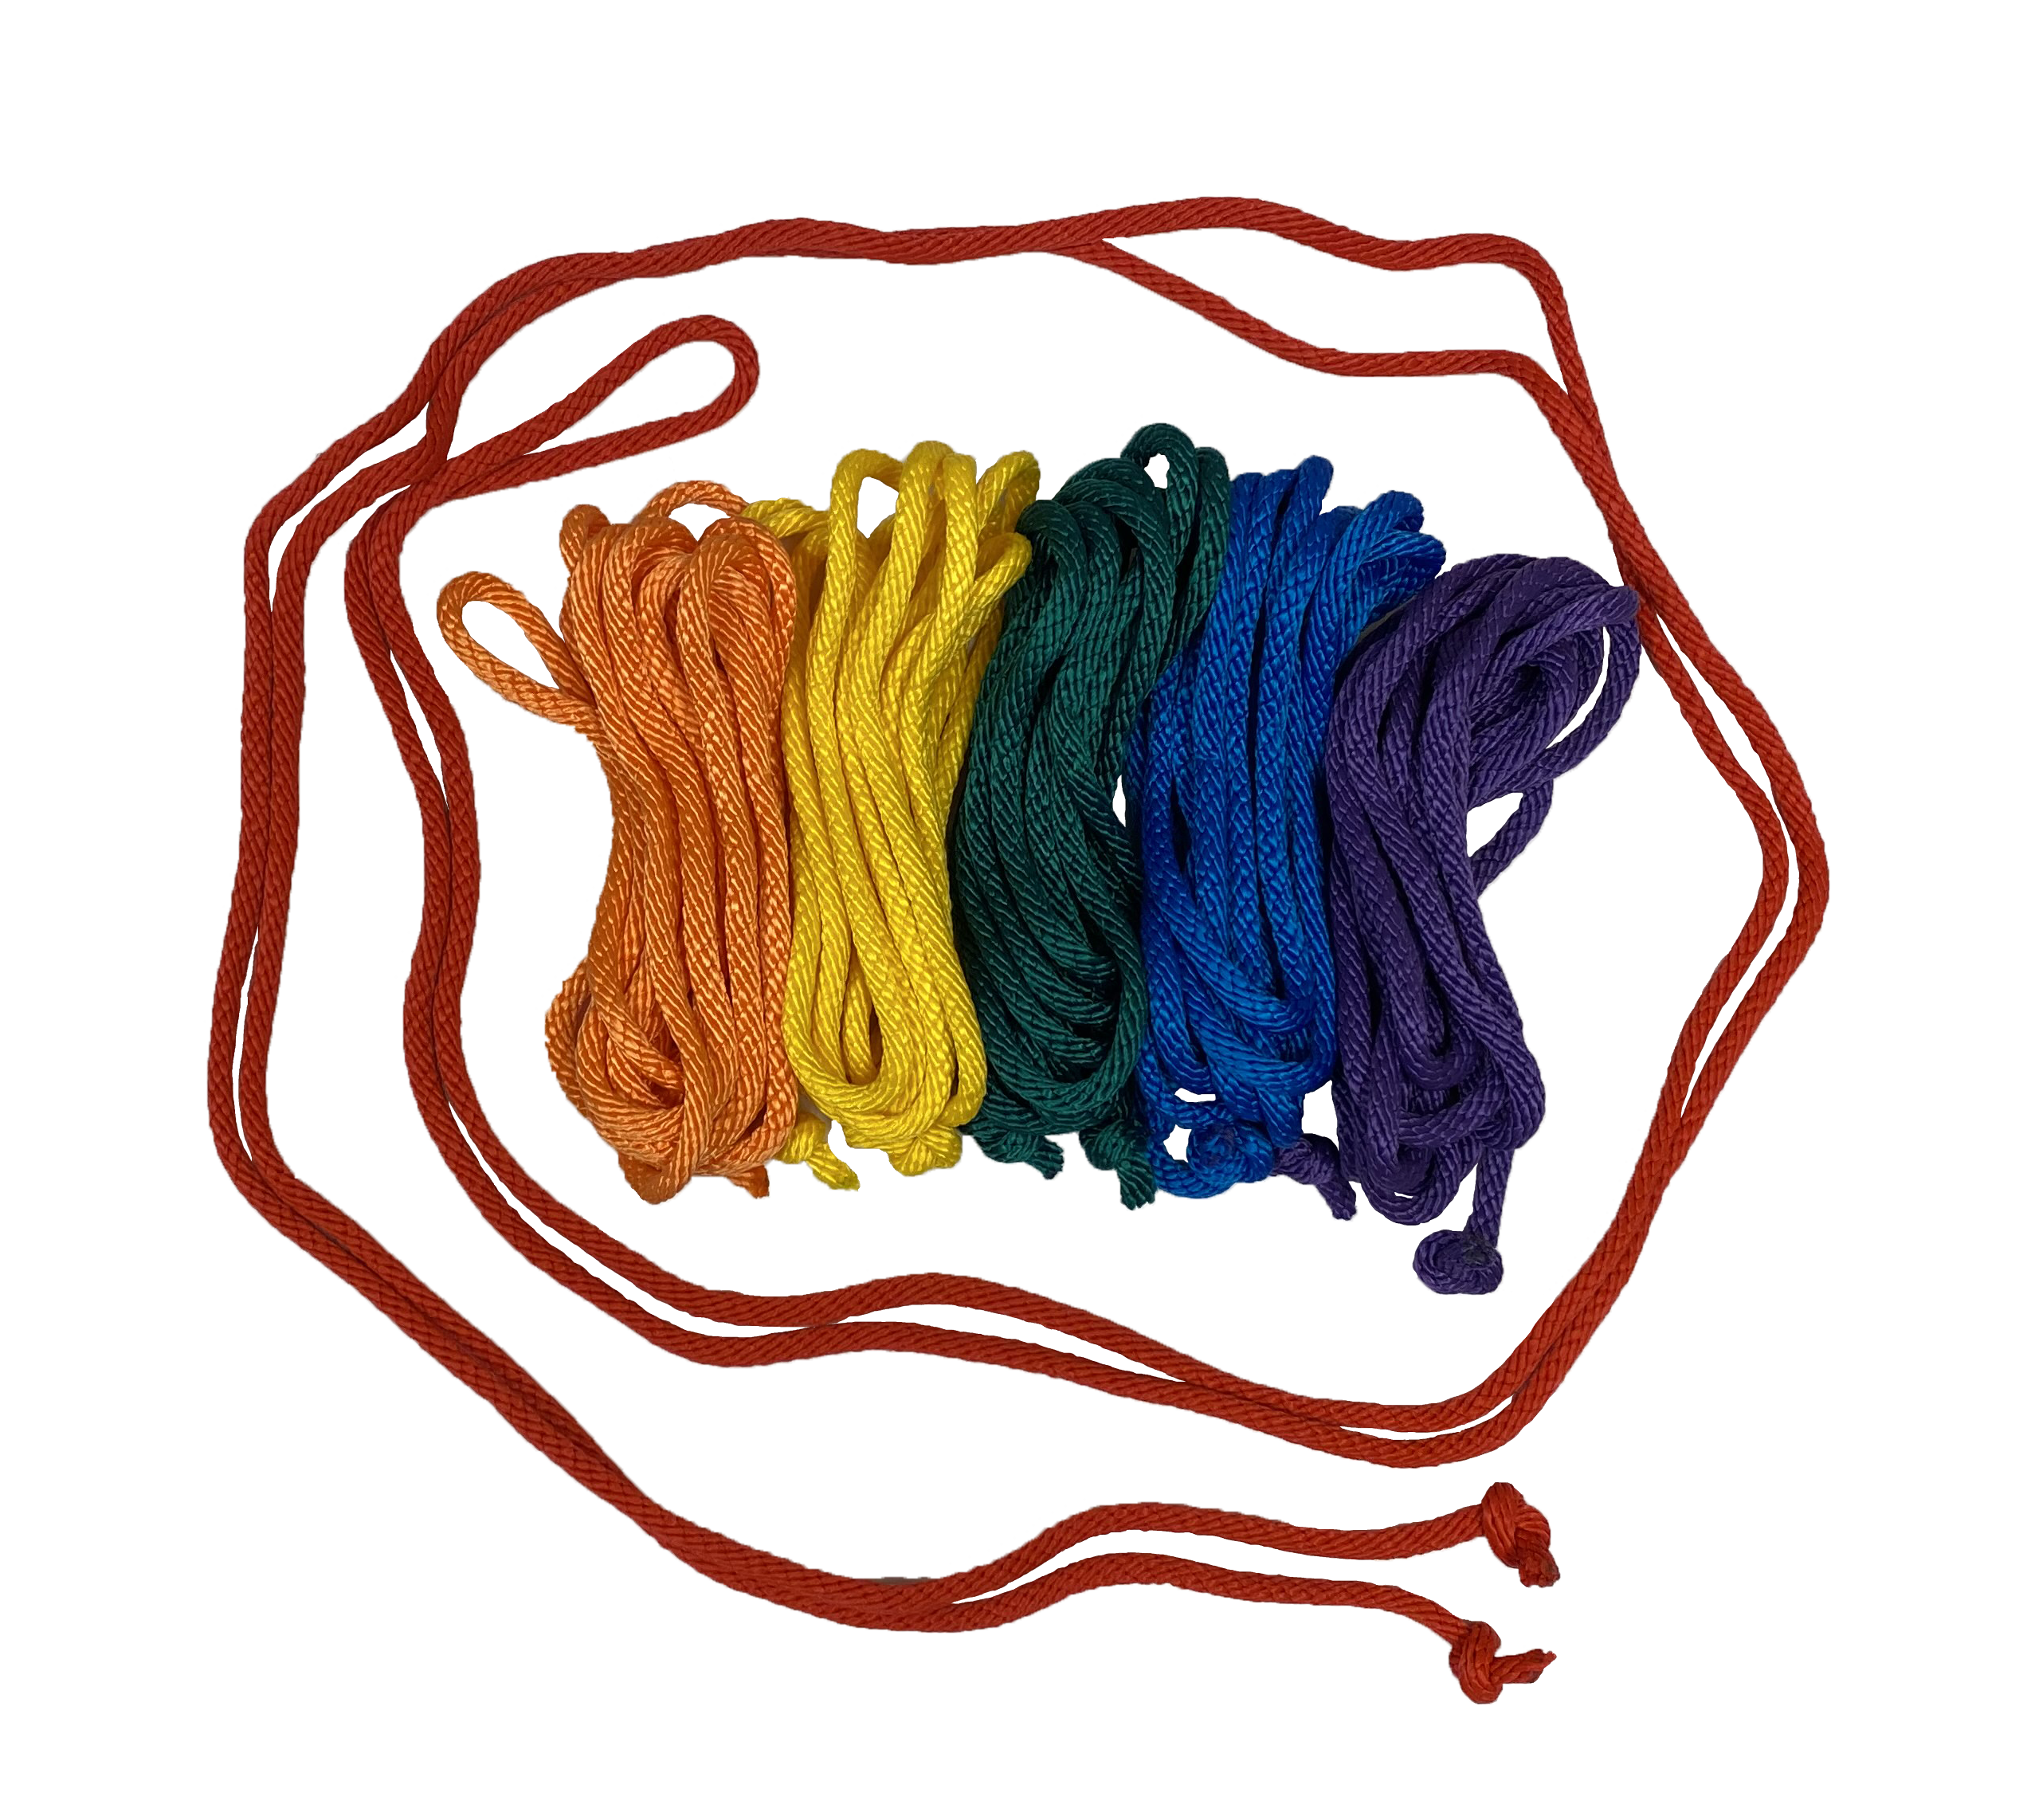 Picture of Everrich EVA-0013 Durable Nylon Jump Ropes - 9 Feet - Set of 6